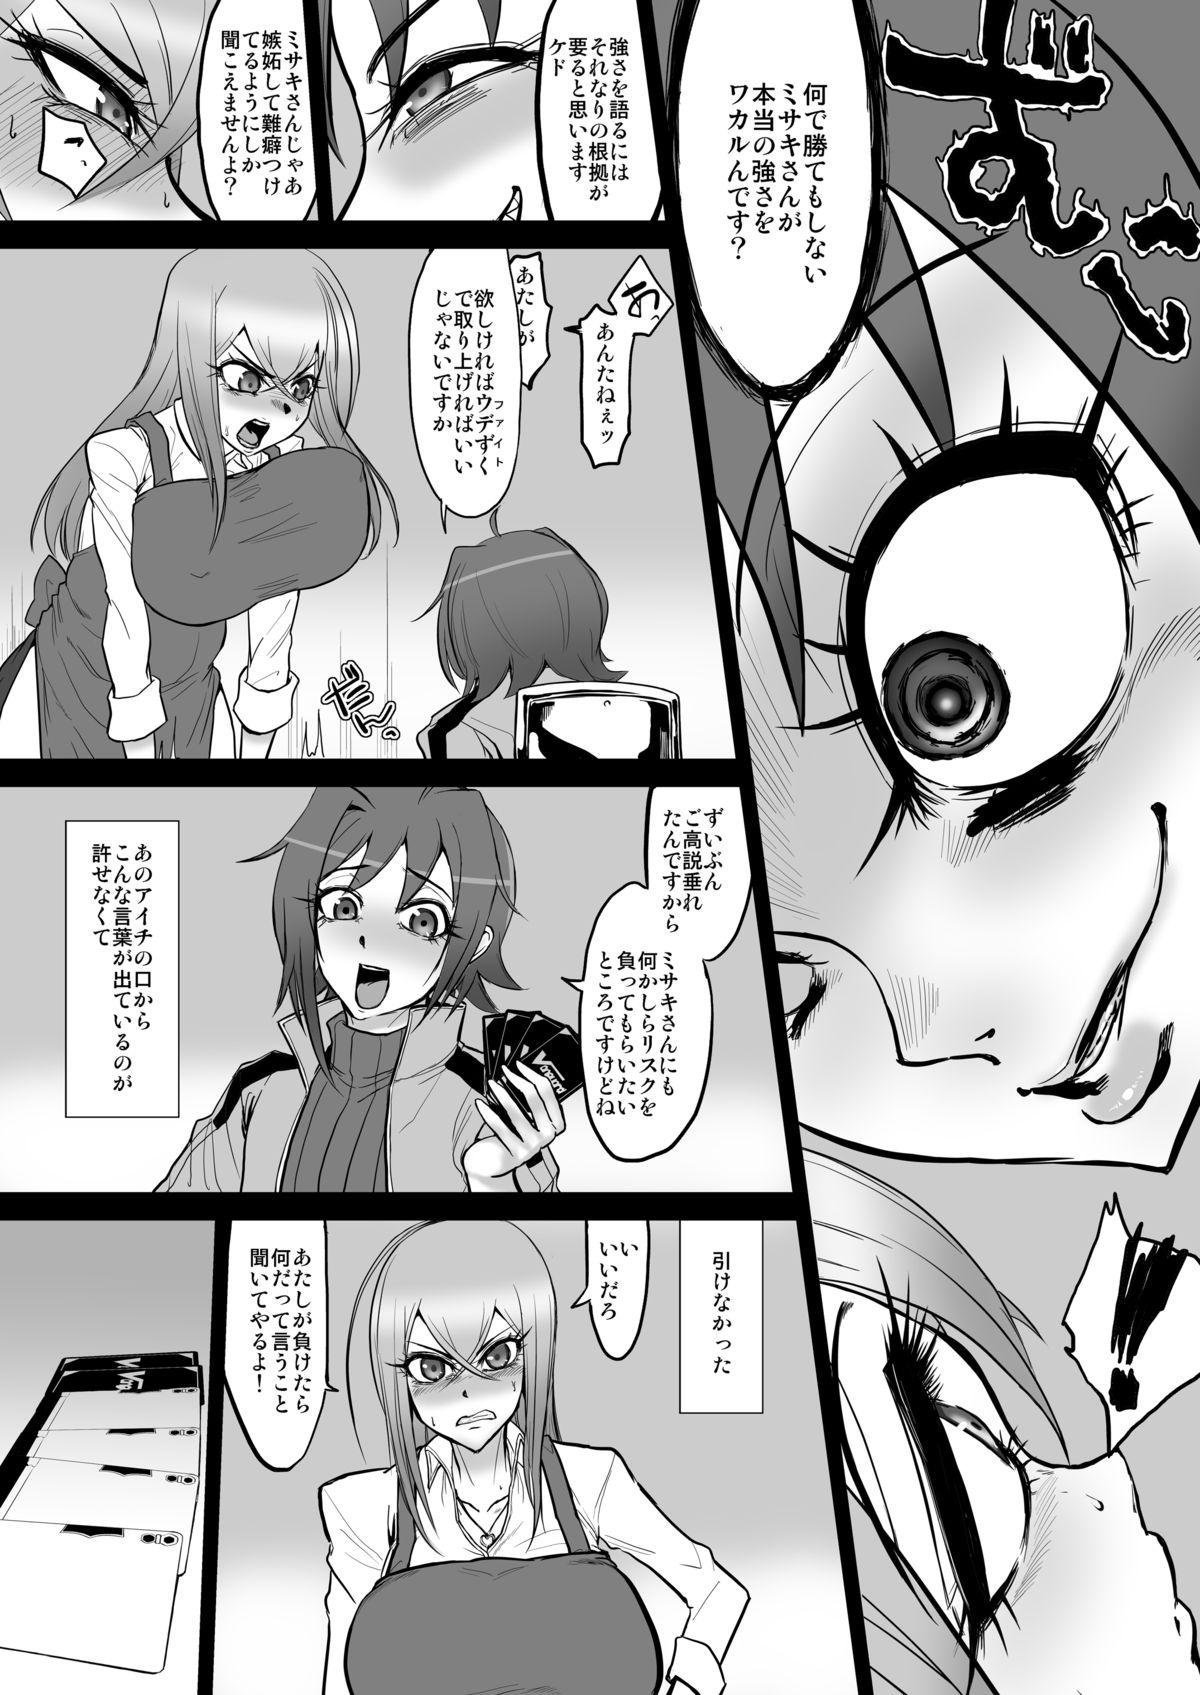 Goth Bind!! - Cardfight vanguard Her - Page 6